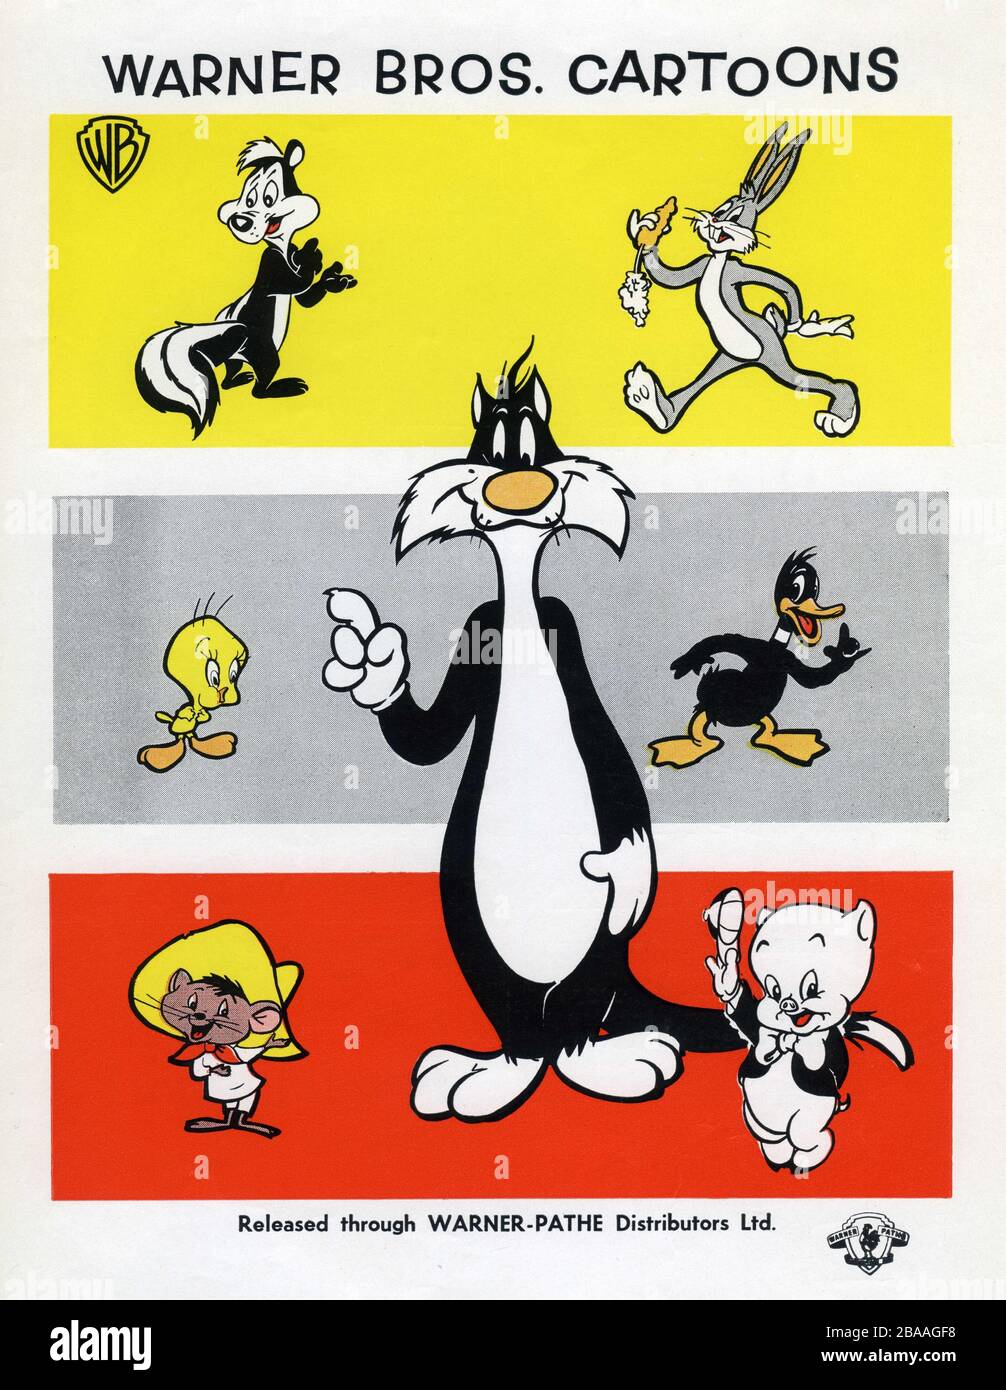 PEPE LE PEW SYLVESTER and TWEETIE PIE BUGS BUNNY DAFFY DUCK SPEEDY GONZALES and PORKY  PIG  in MERRIE MELODIES and LOONY TUNES Warner Bros. Cartoons later 1950's British Trade Ad Stock Photo